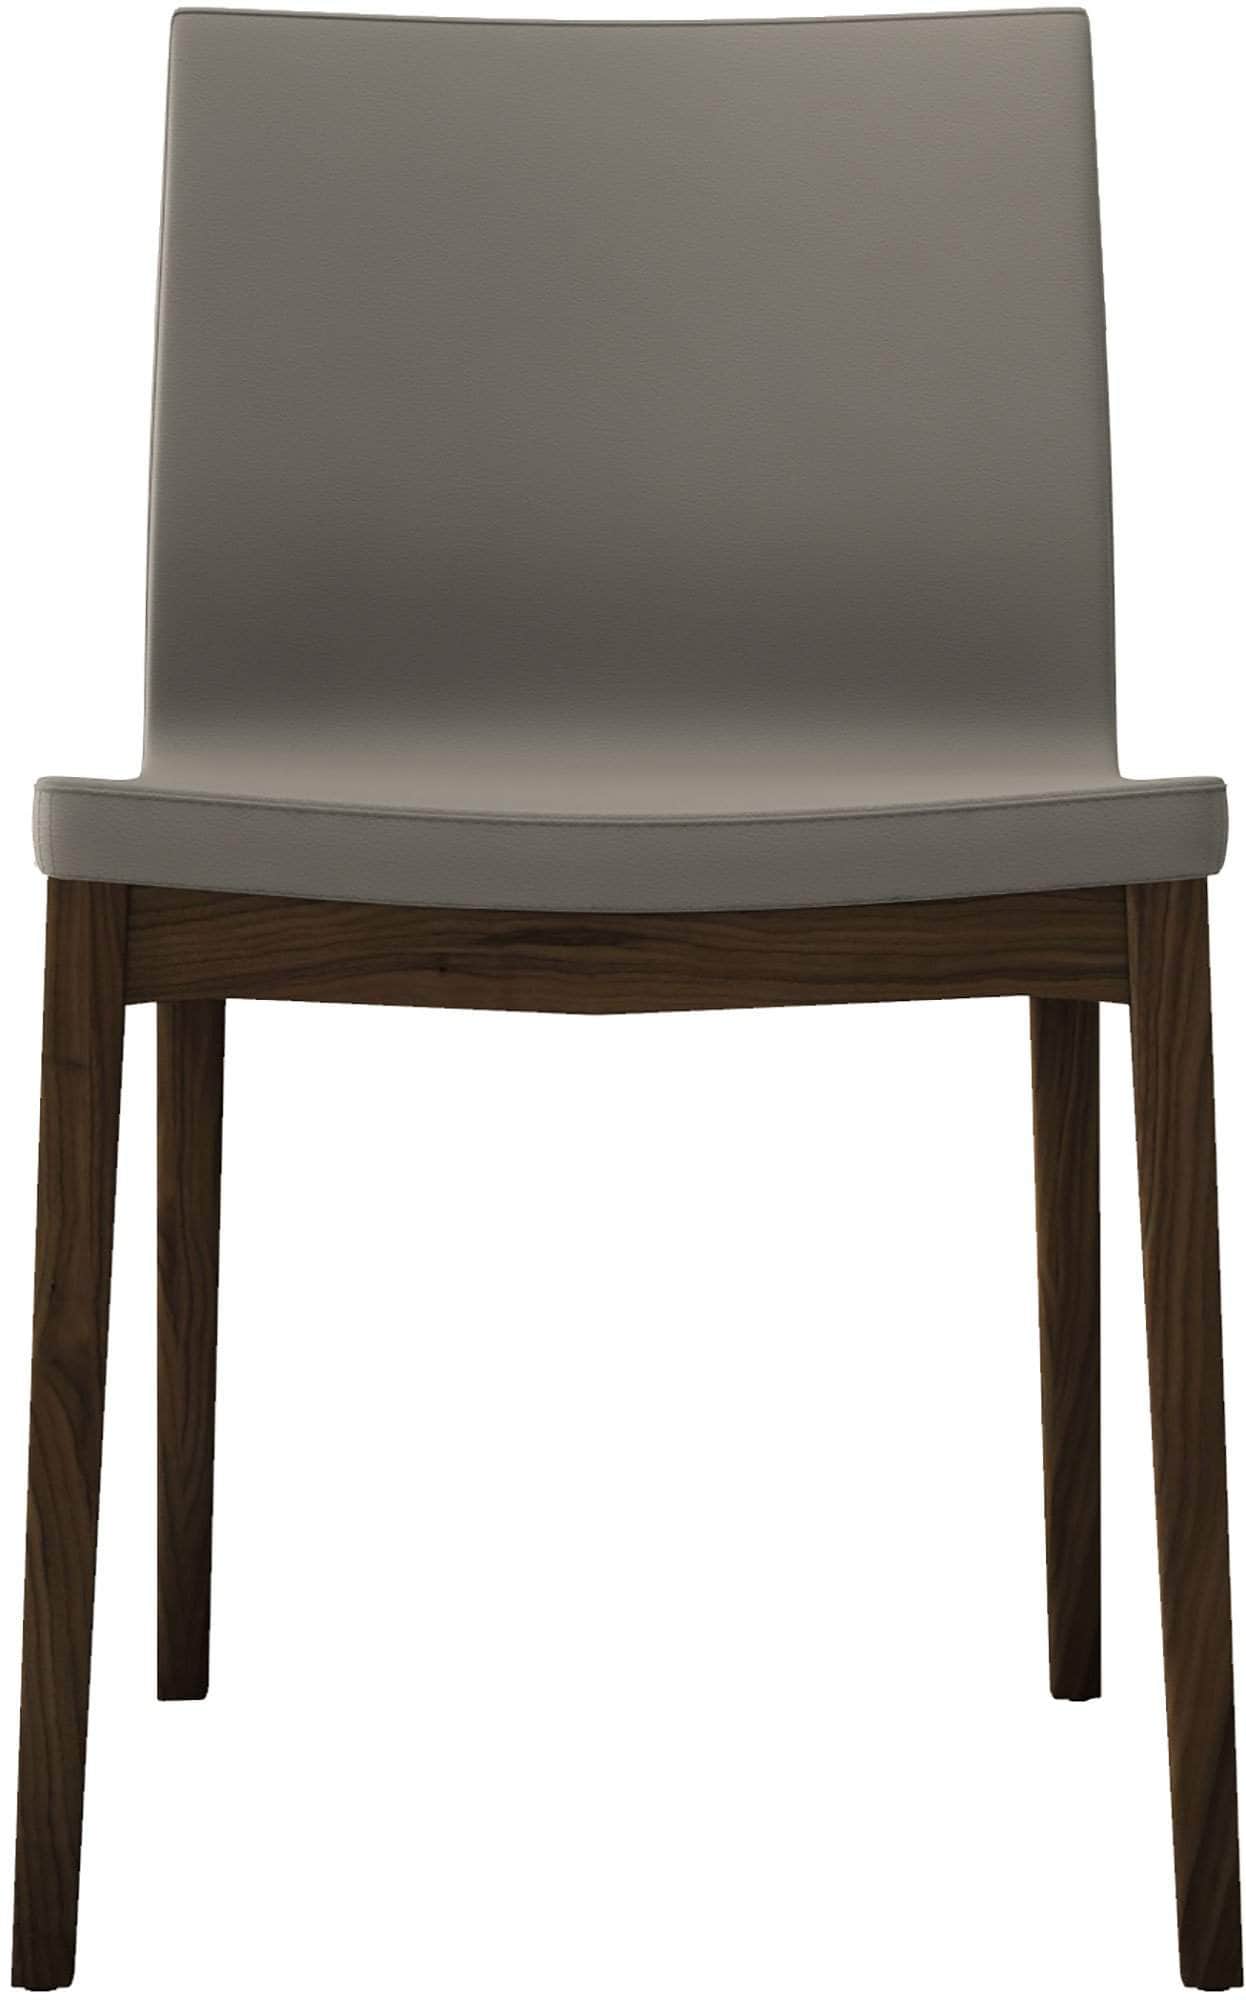 Modloft Dining Chair Dove Grey Eco Leather/Walnut Enna Italian-Made Eco Pelle Leather Dining Chair (Set of 2) - Available in 2 Colours